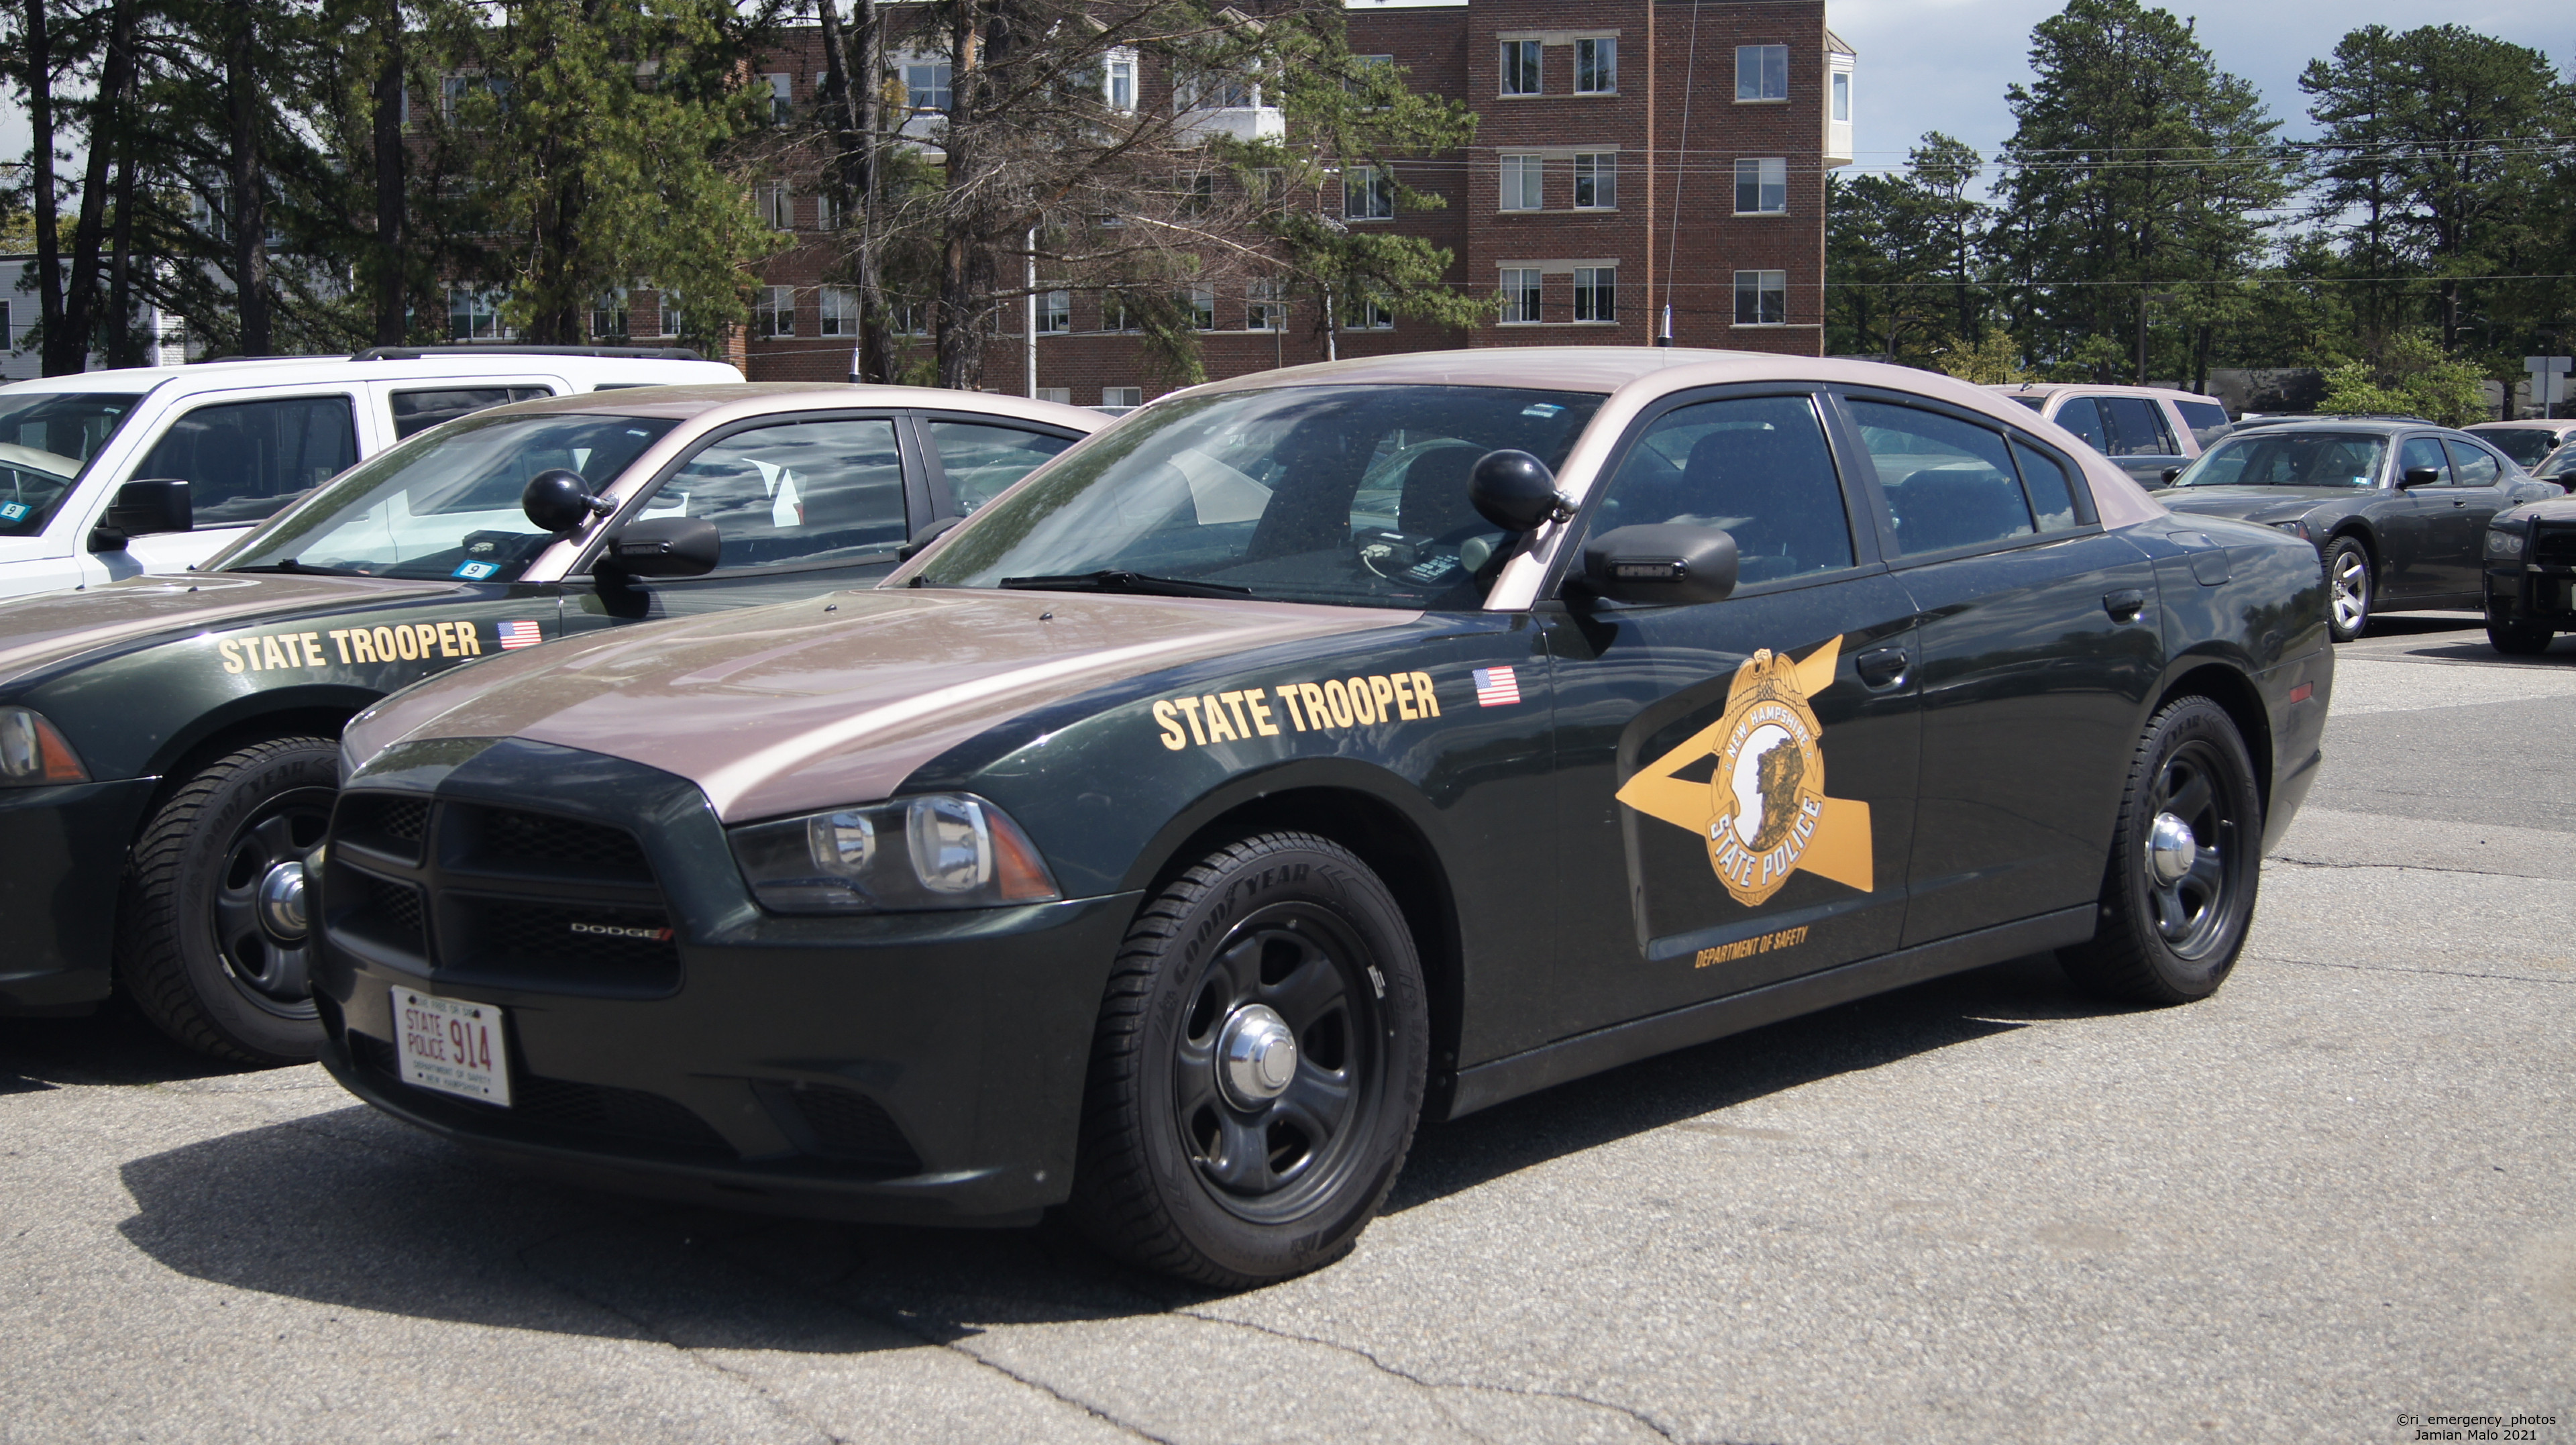 A photo  of New Hampshire State Police
            Cruiser 914, a 2011-2013 Dodge Charger             taken by Jamian Malo